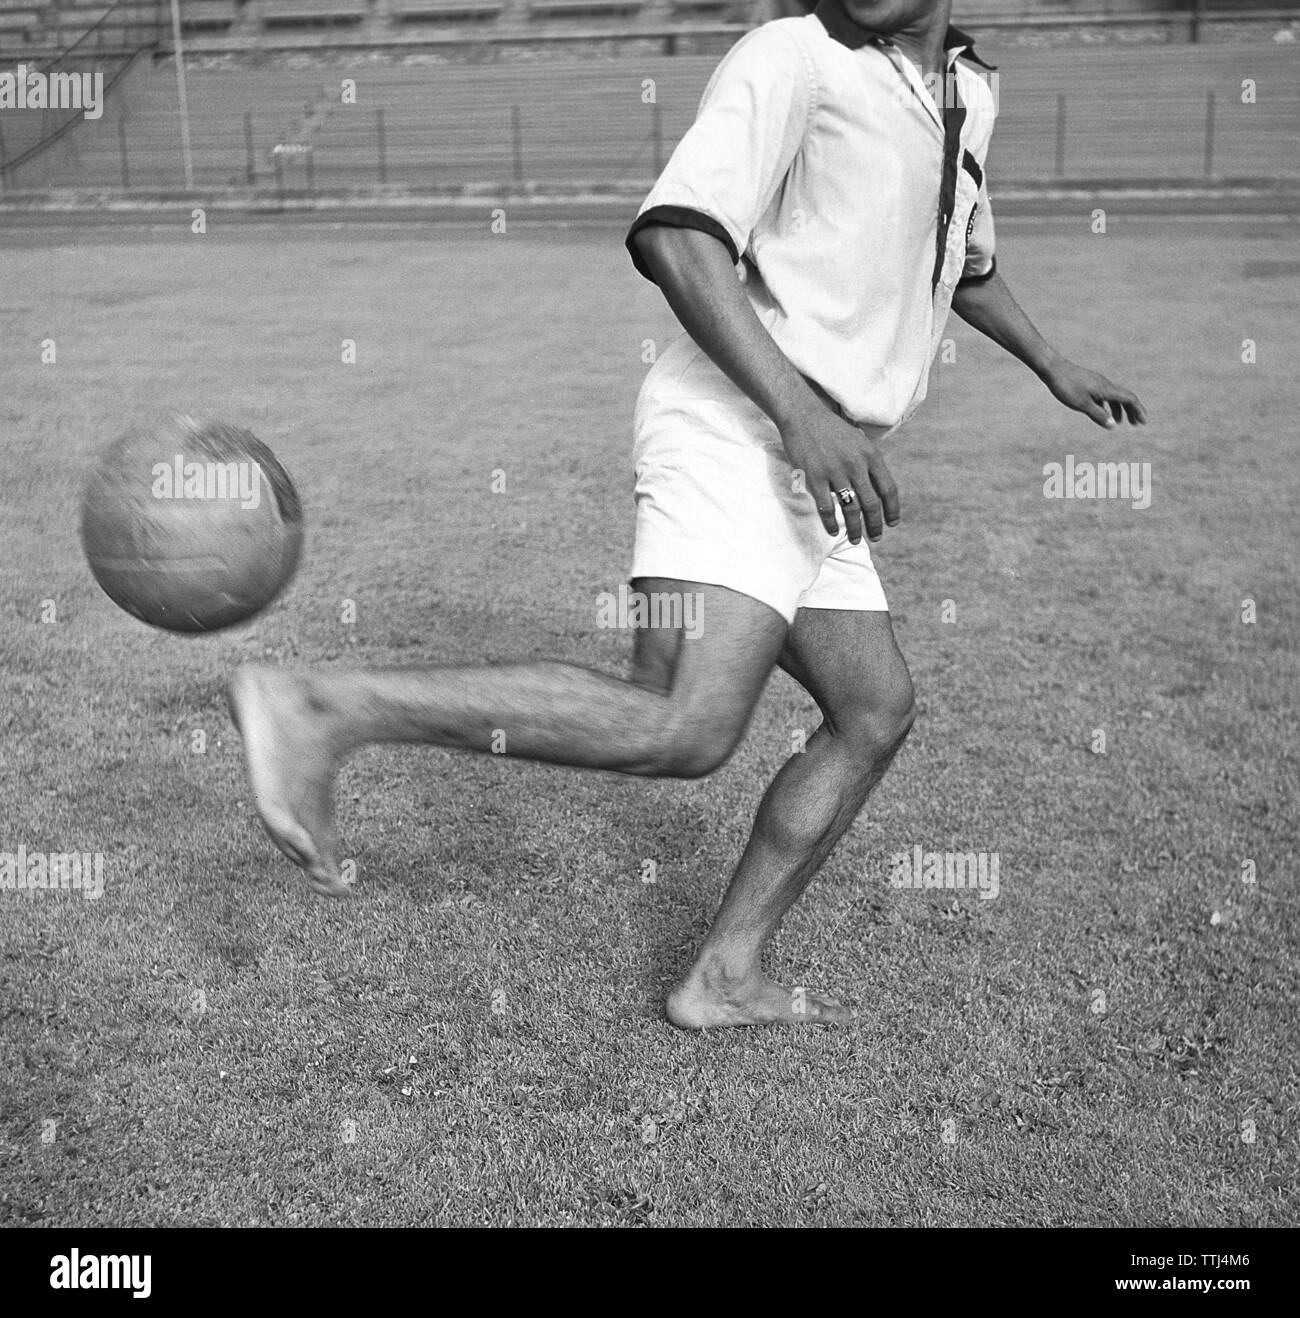 1950s soccer player. A man playing football barefoot heels the ball in the air. Sweden 1952 Kristoffersson BG39-12 Stock Photo